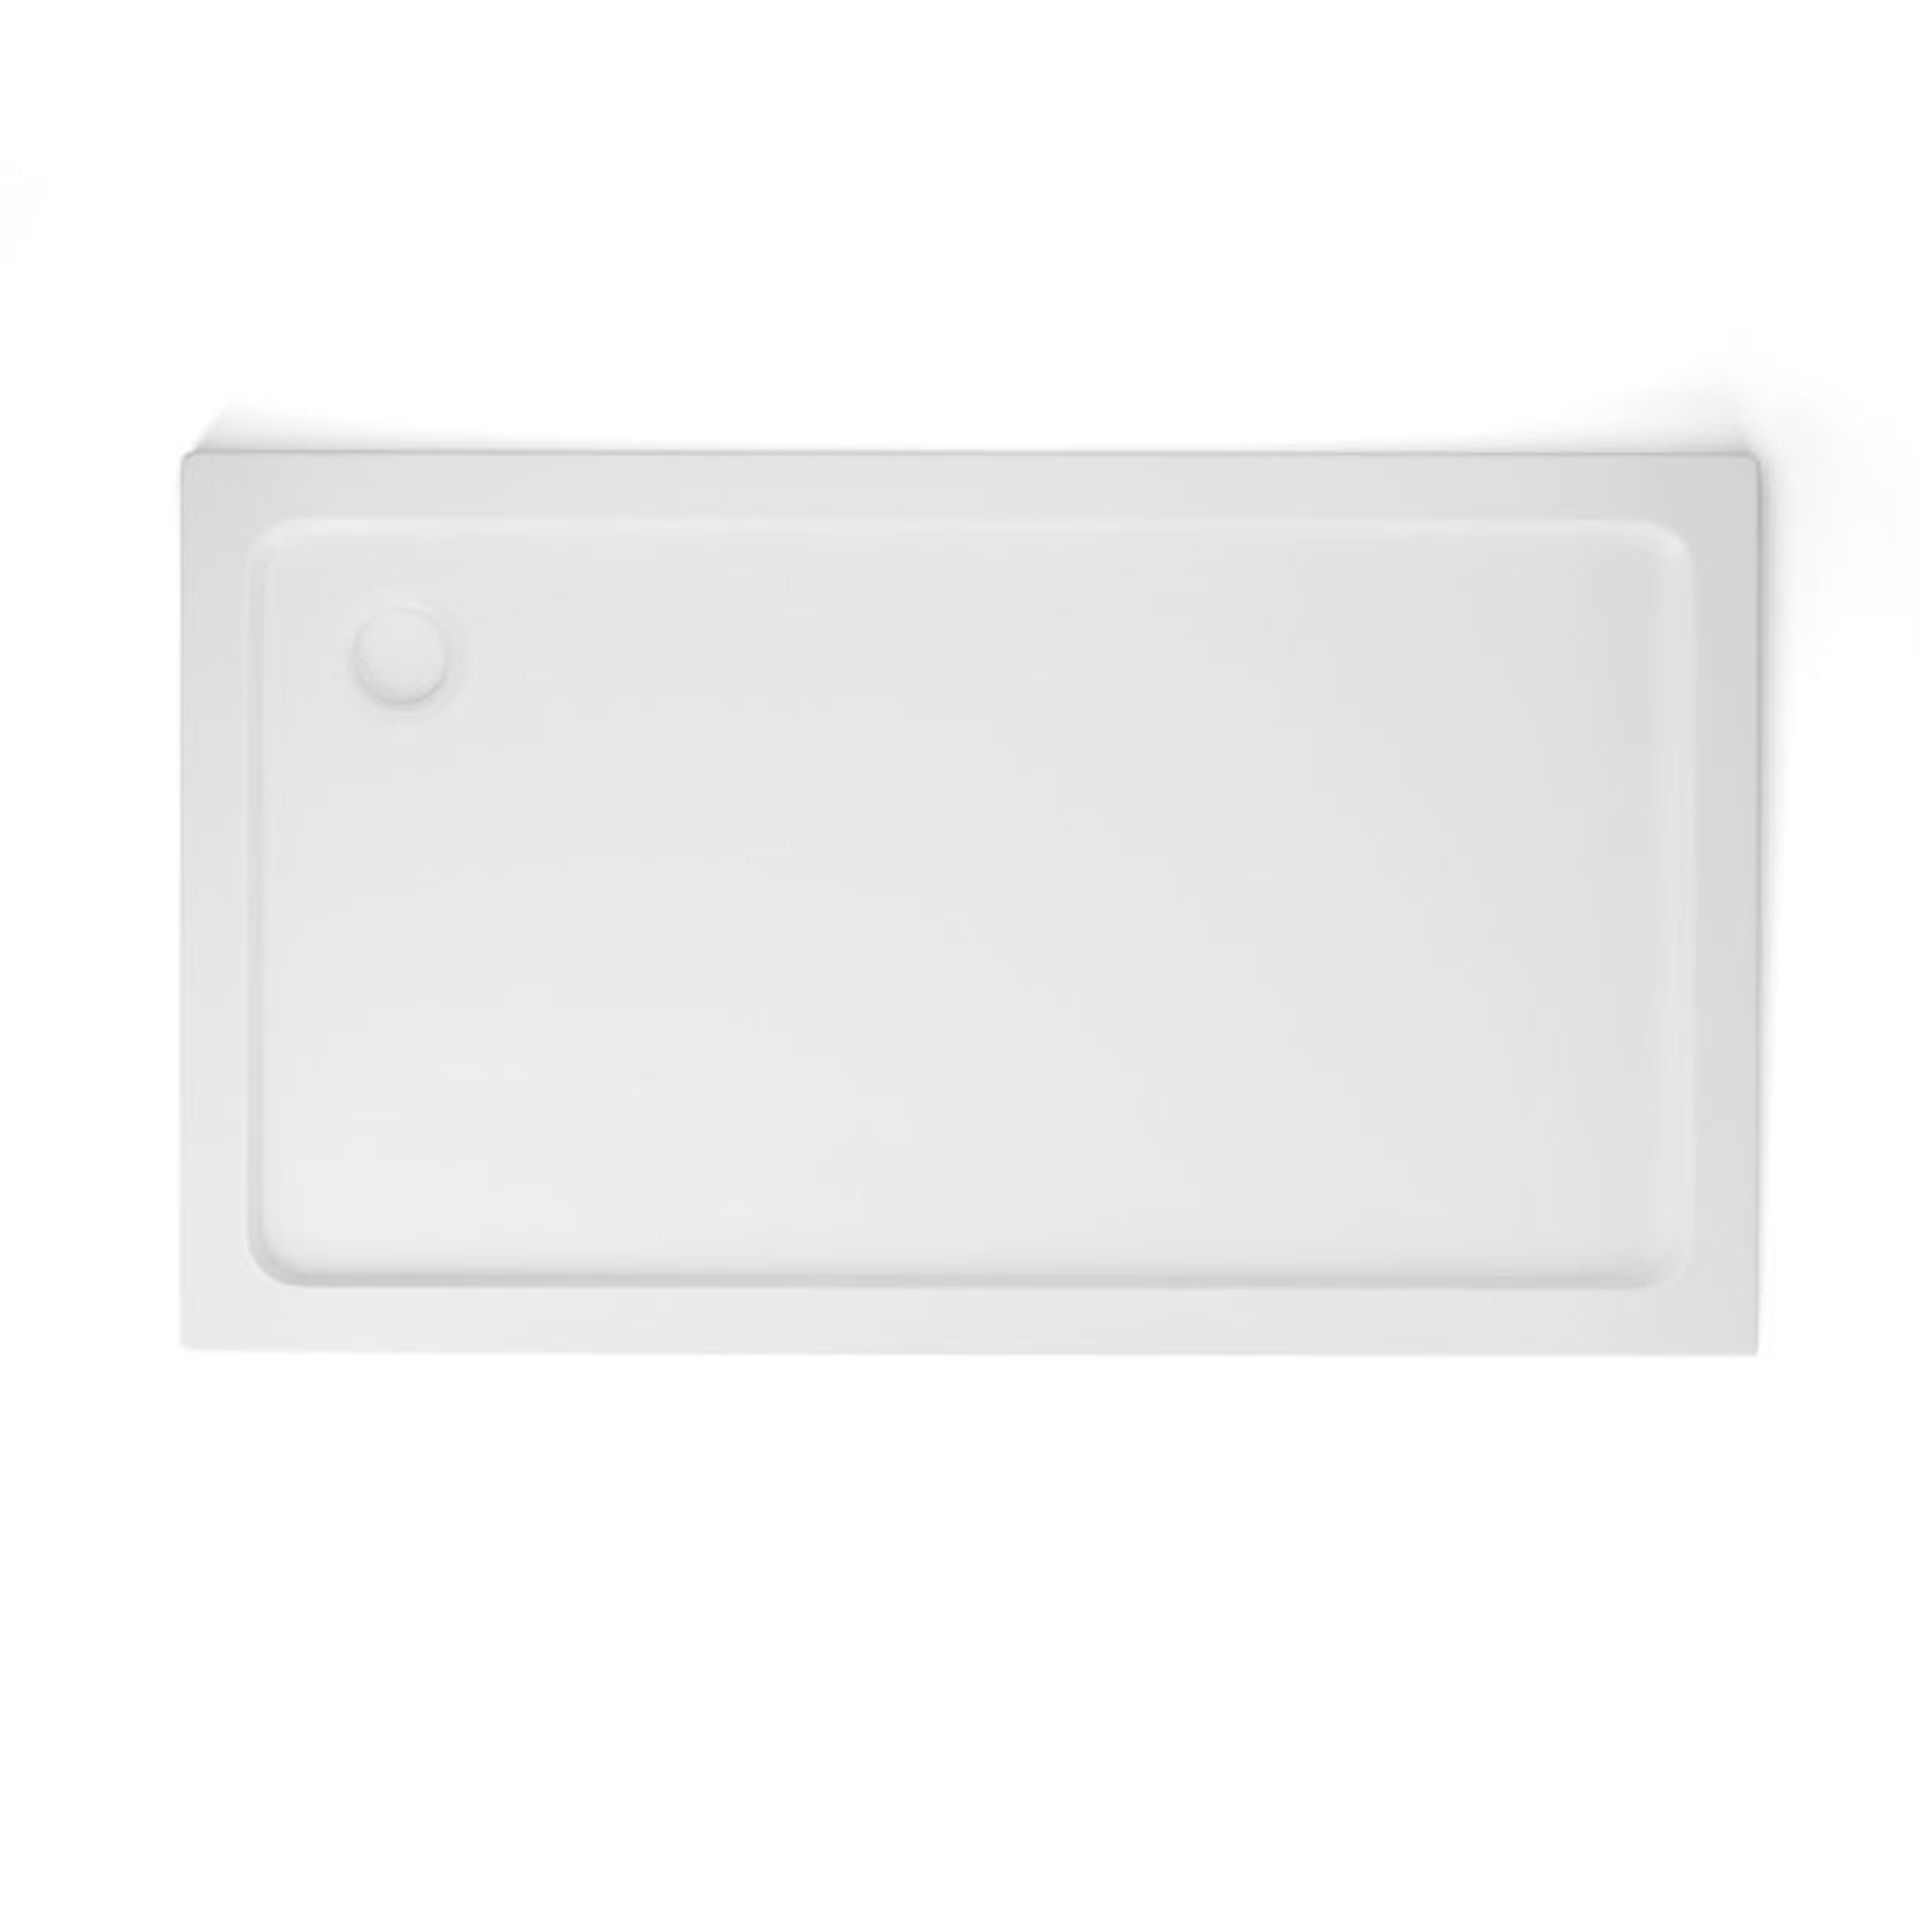 (EY39) 1800x800mm Rectangular Ultra Slim Stone Shower Tray. Constructed from acrylic capped stone